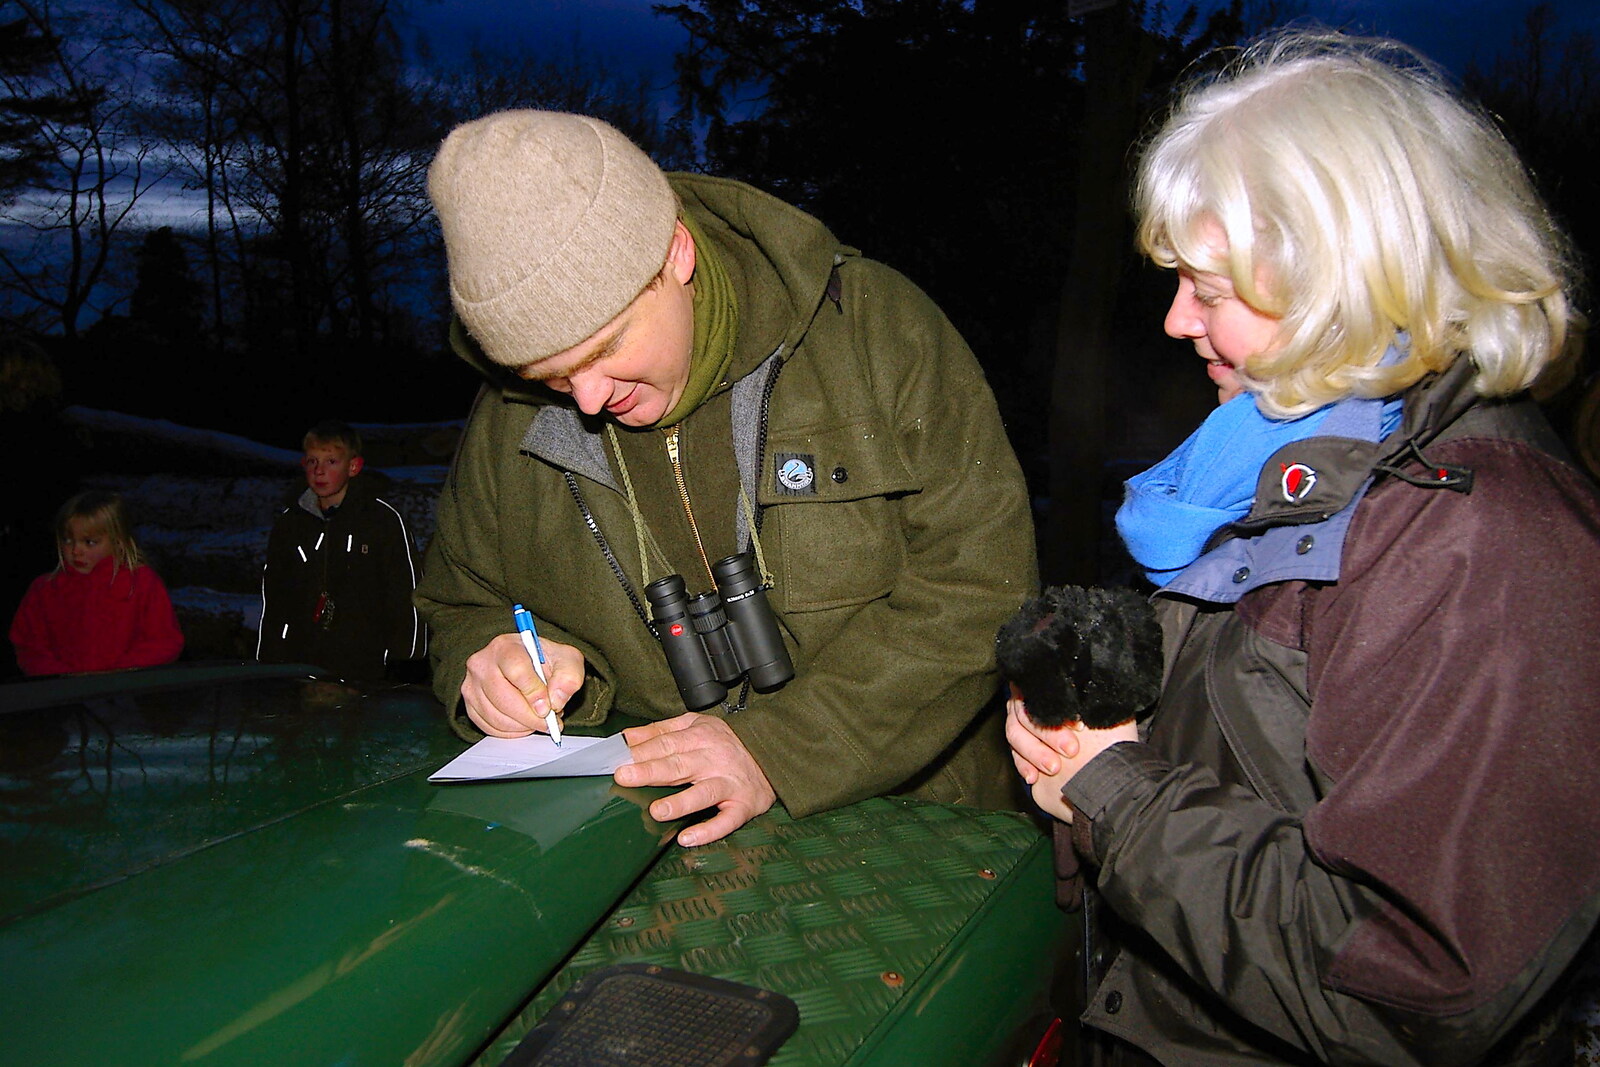 More signatures from Walk Like a Shadow: A Day With Ray Mears, Ashdown Forest, East Sussex - 29th December 2005